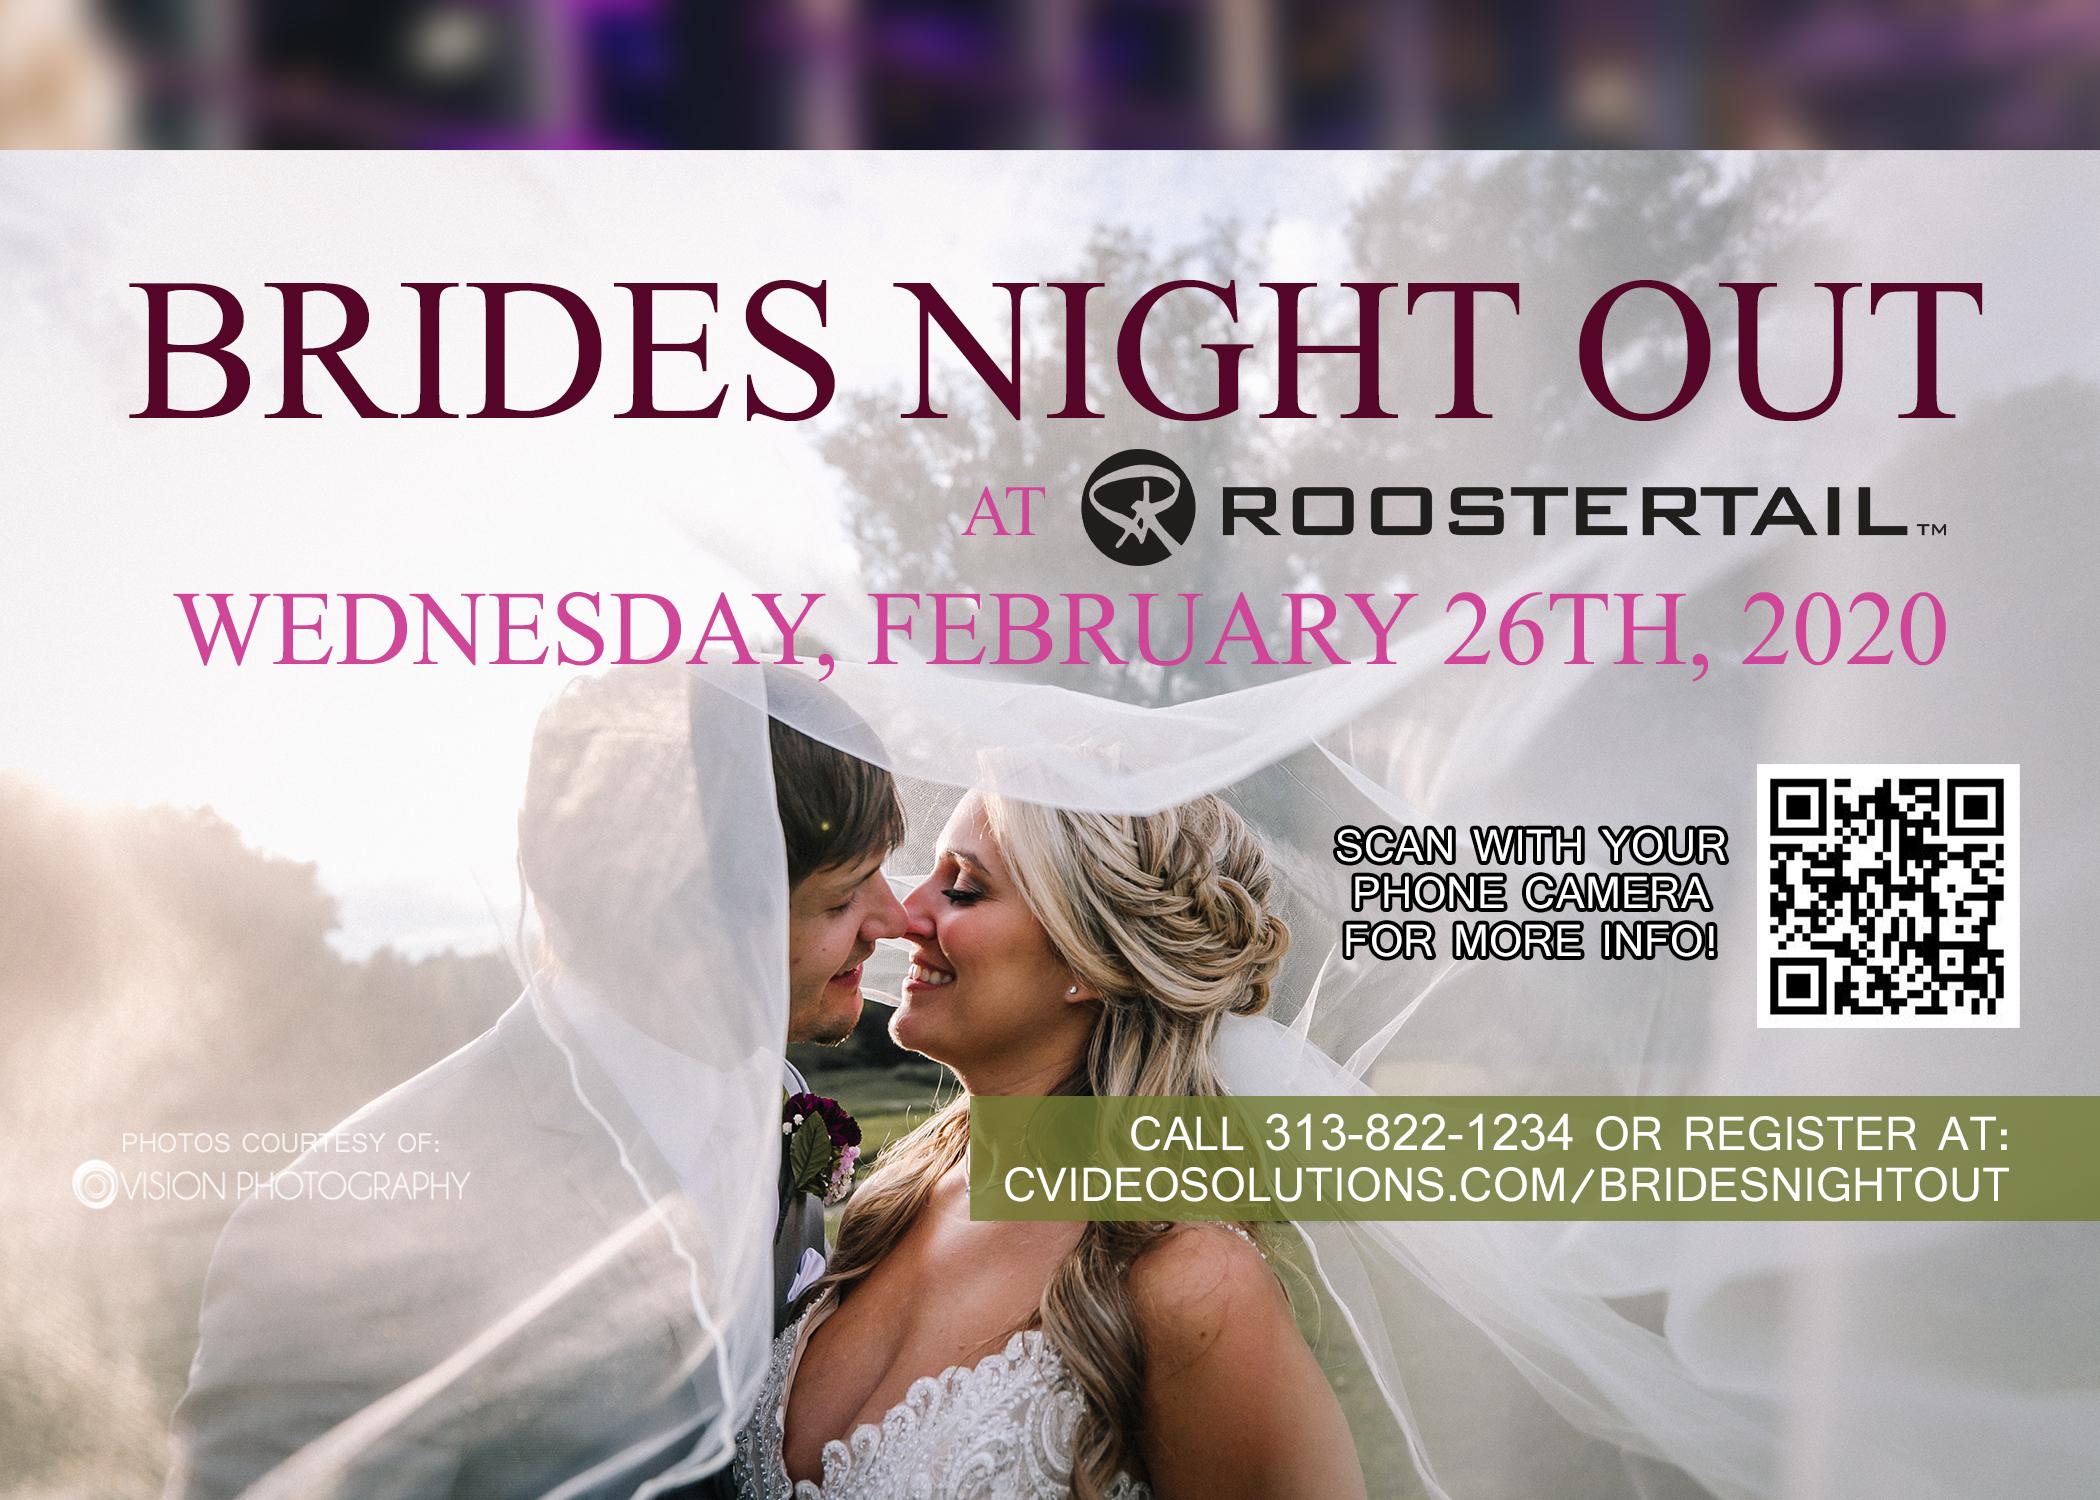 Brides Night Out at The Roostertail